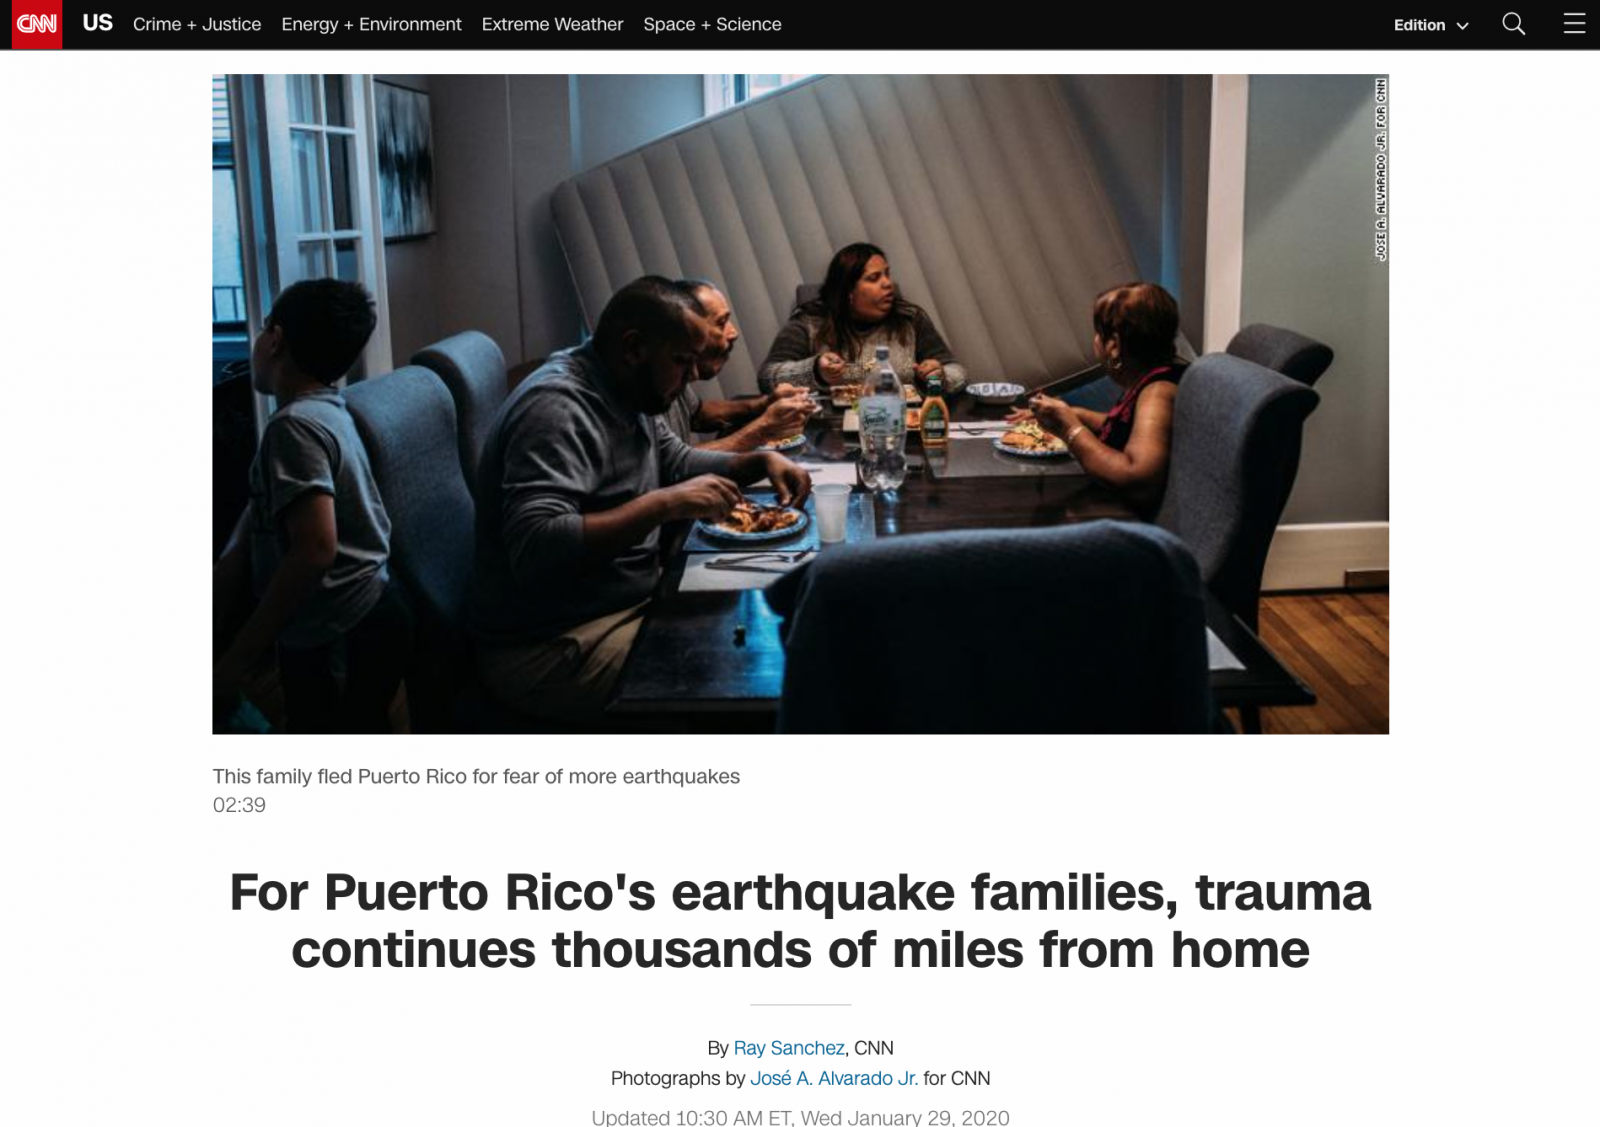 for CNN: For Puerto Rico's earthquake families, trauma continues thousands of miles from home.